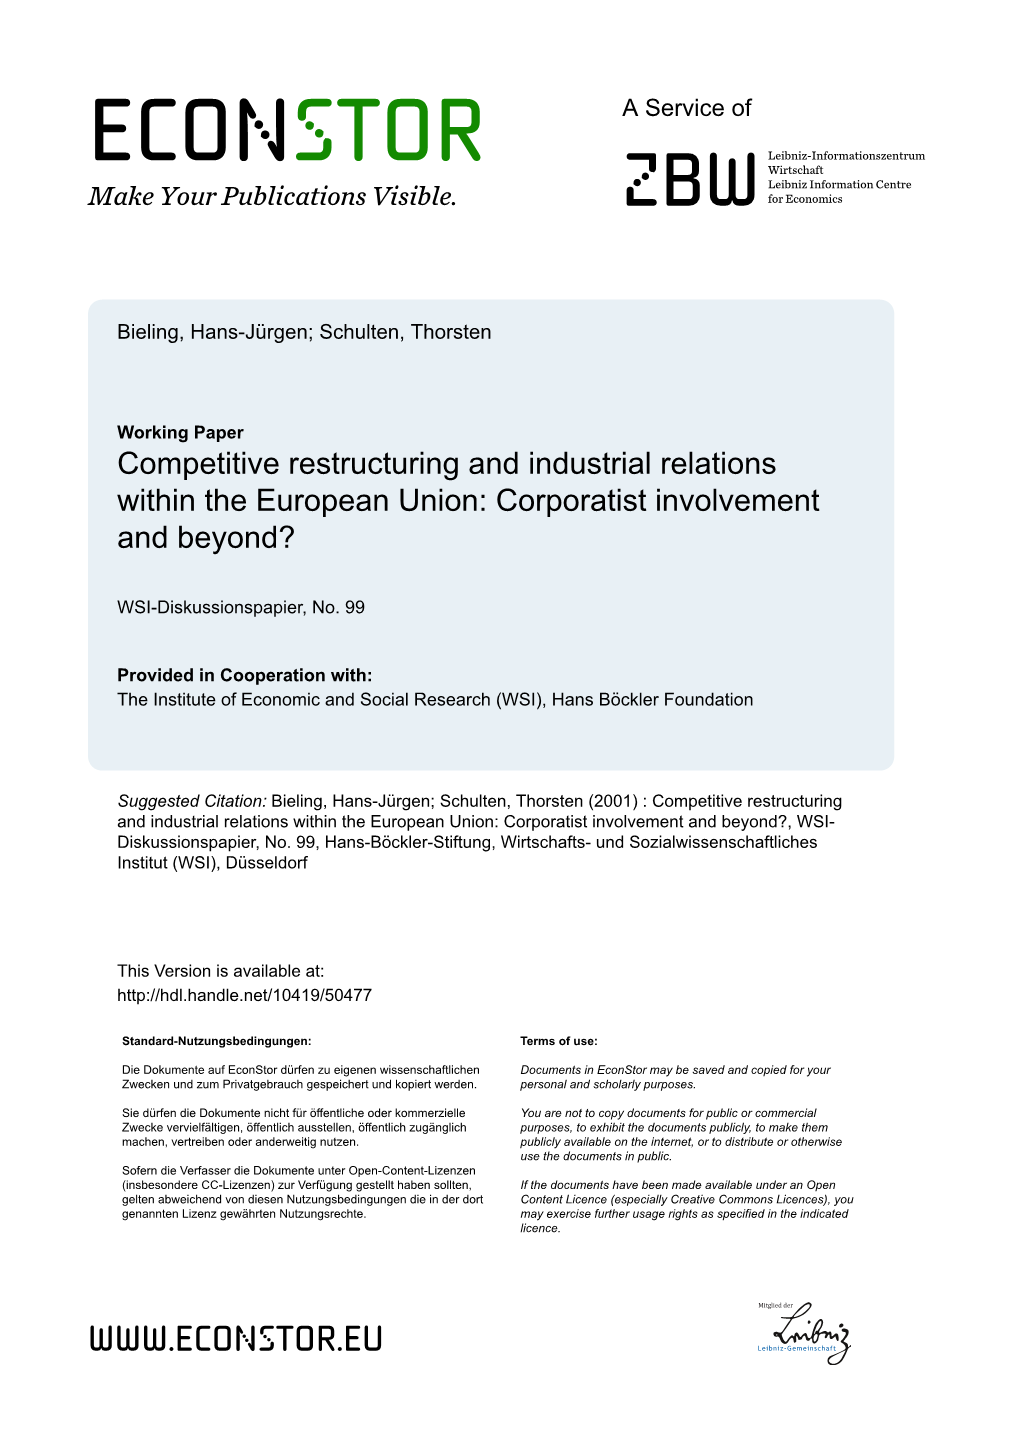 Competitive Restructuring and Industrial Relations Within the European Union: Corporatist Involvement and Beyond?